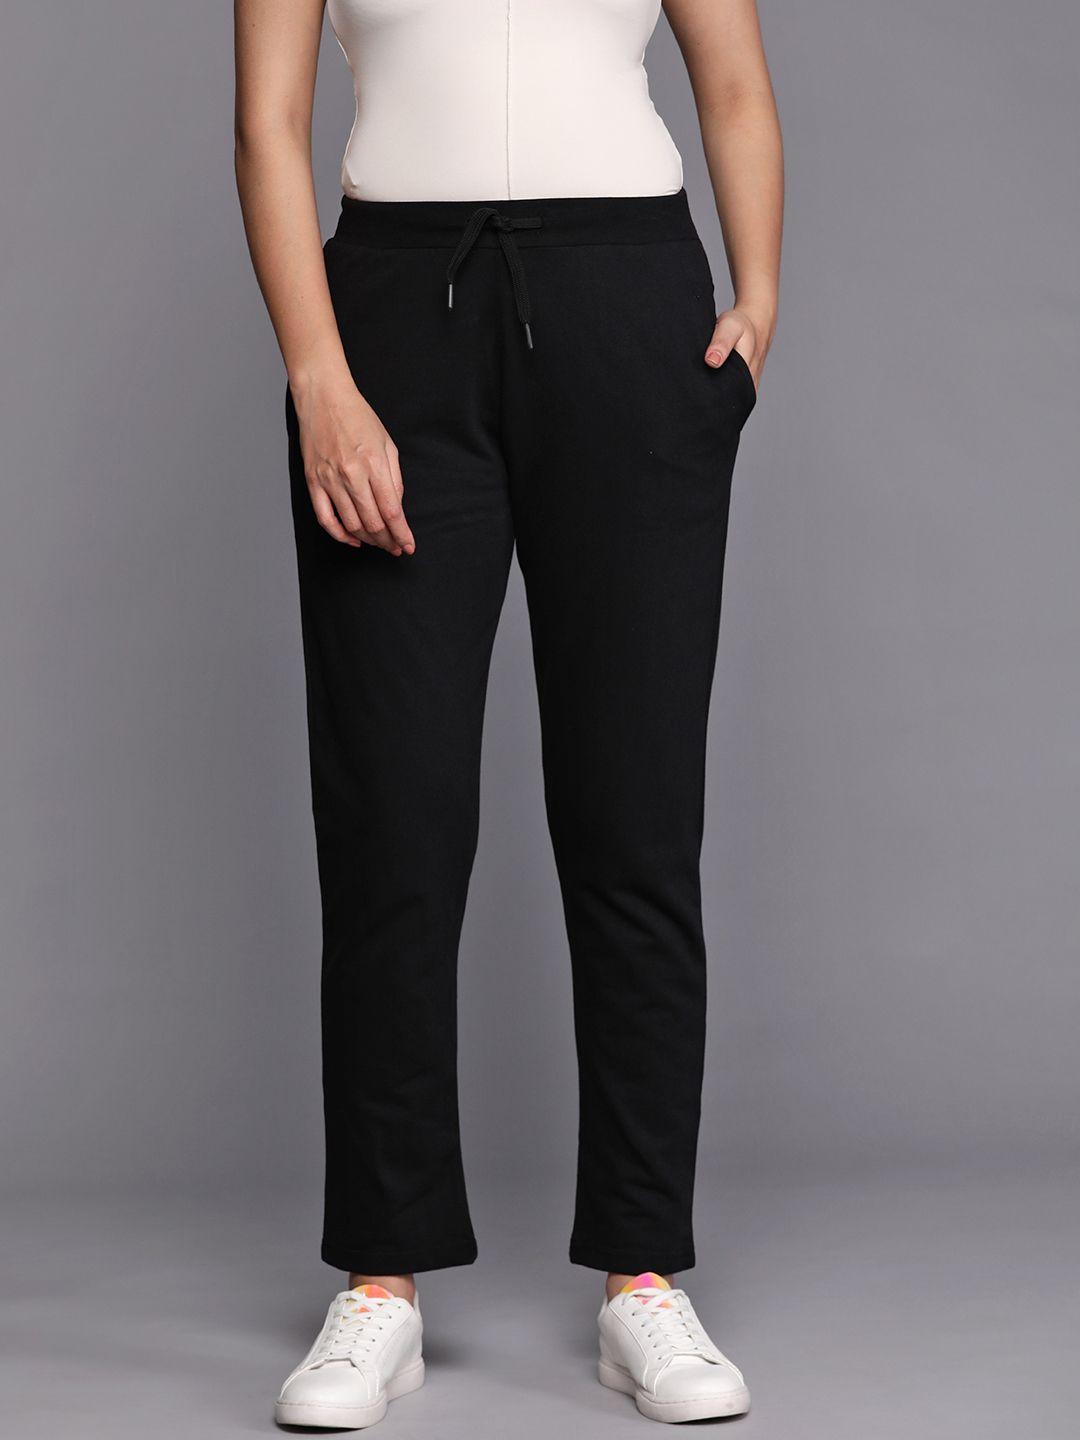 allen solly woman pure cotton track pants